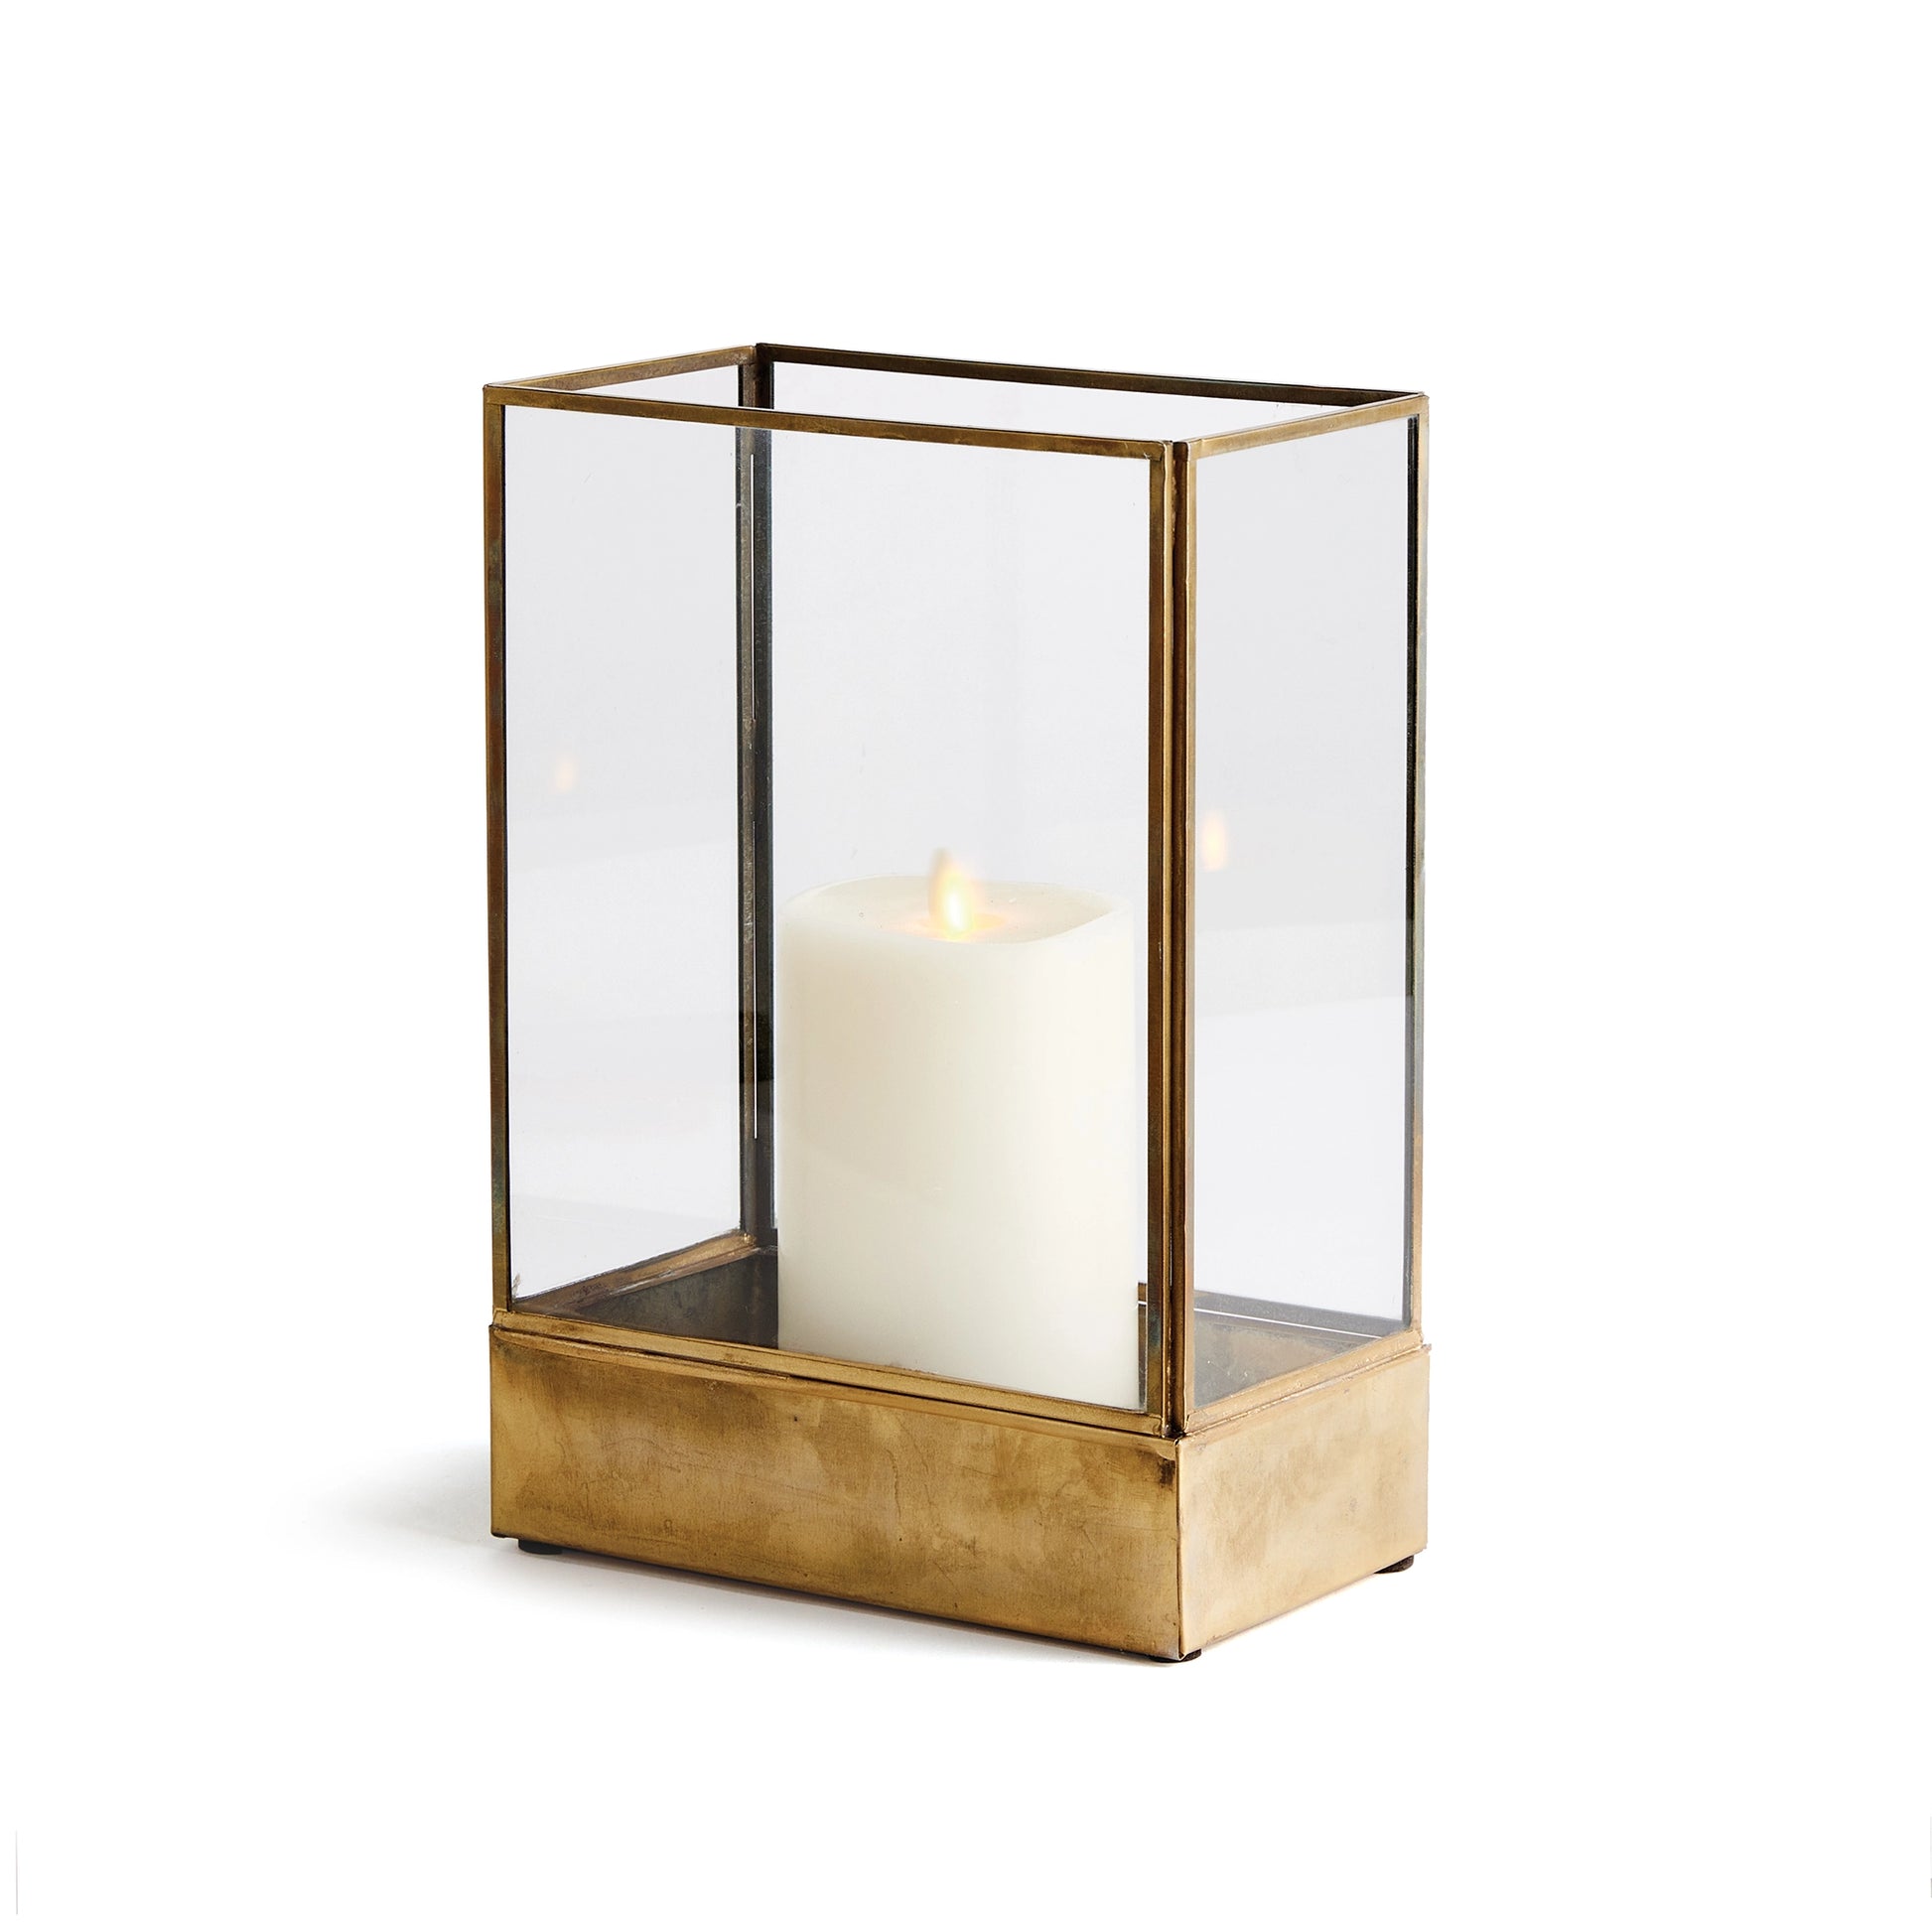 Small brass hurricane candle holder with light gray background.